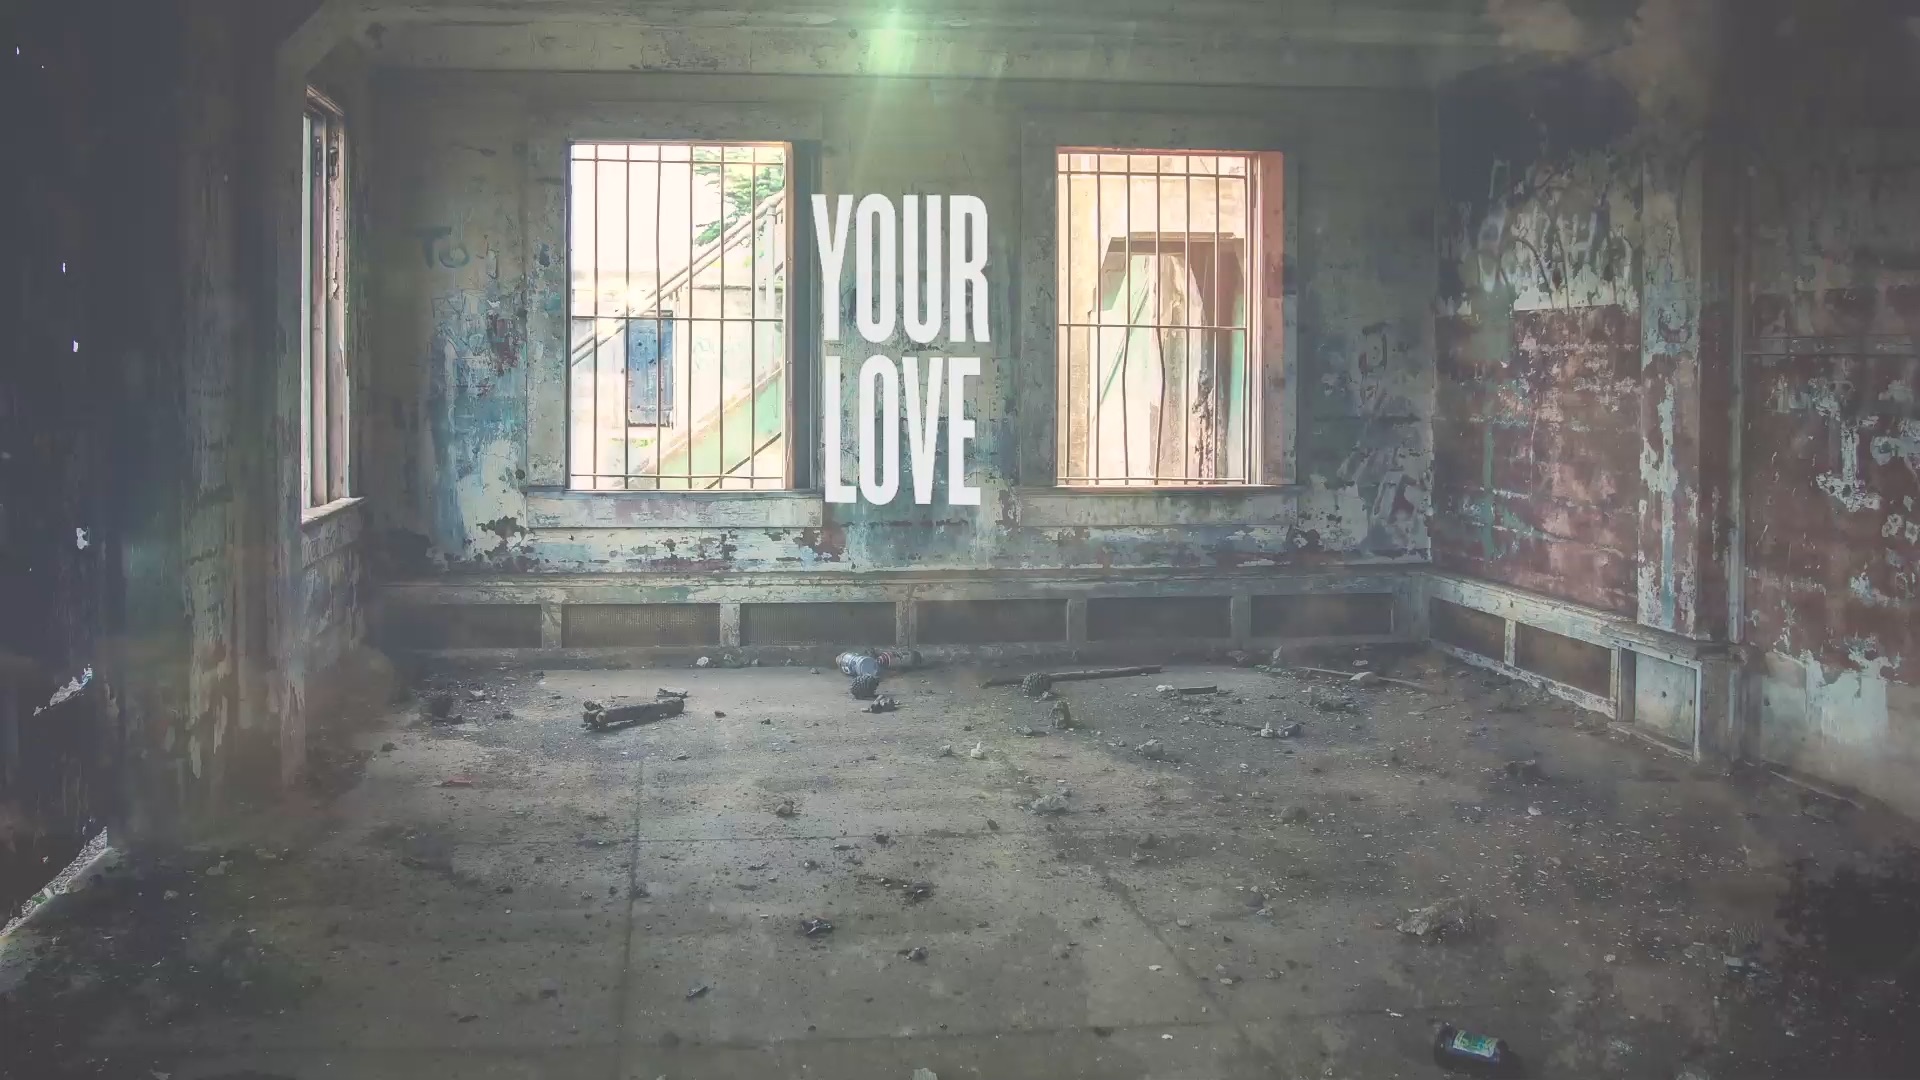 Your Love Defends Me (Live) - Music Video by Matt Maher - Apple Music